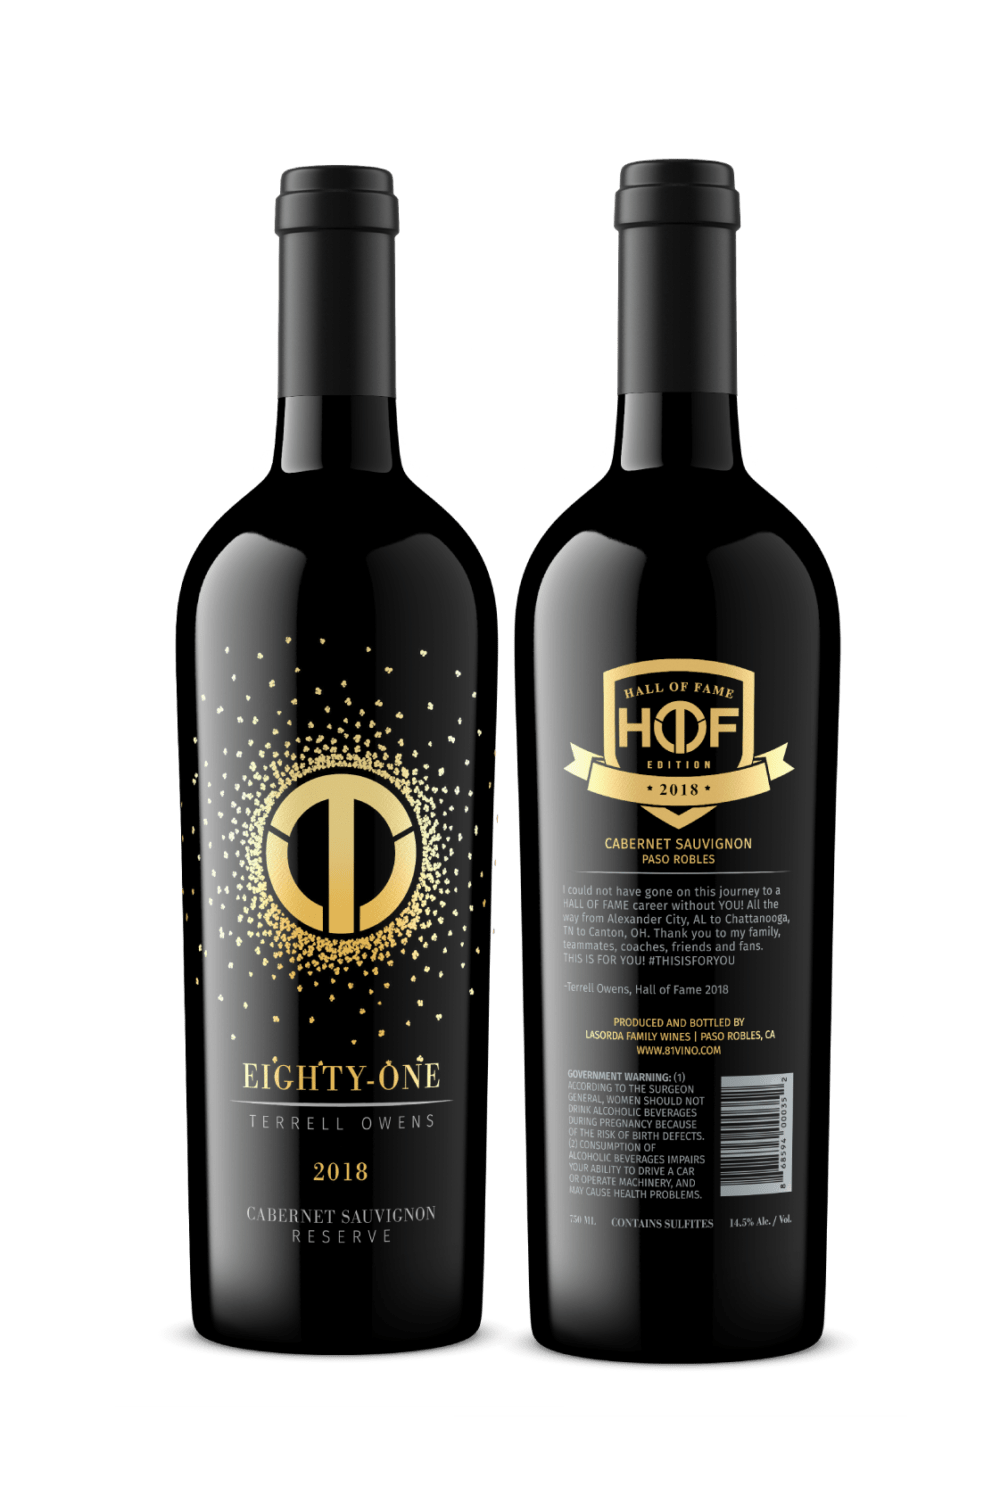 A bottle of wine with the label eighty one.